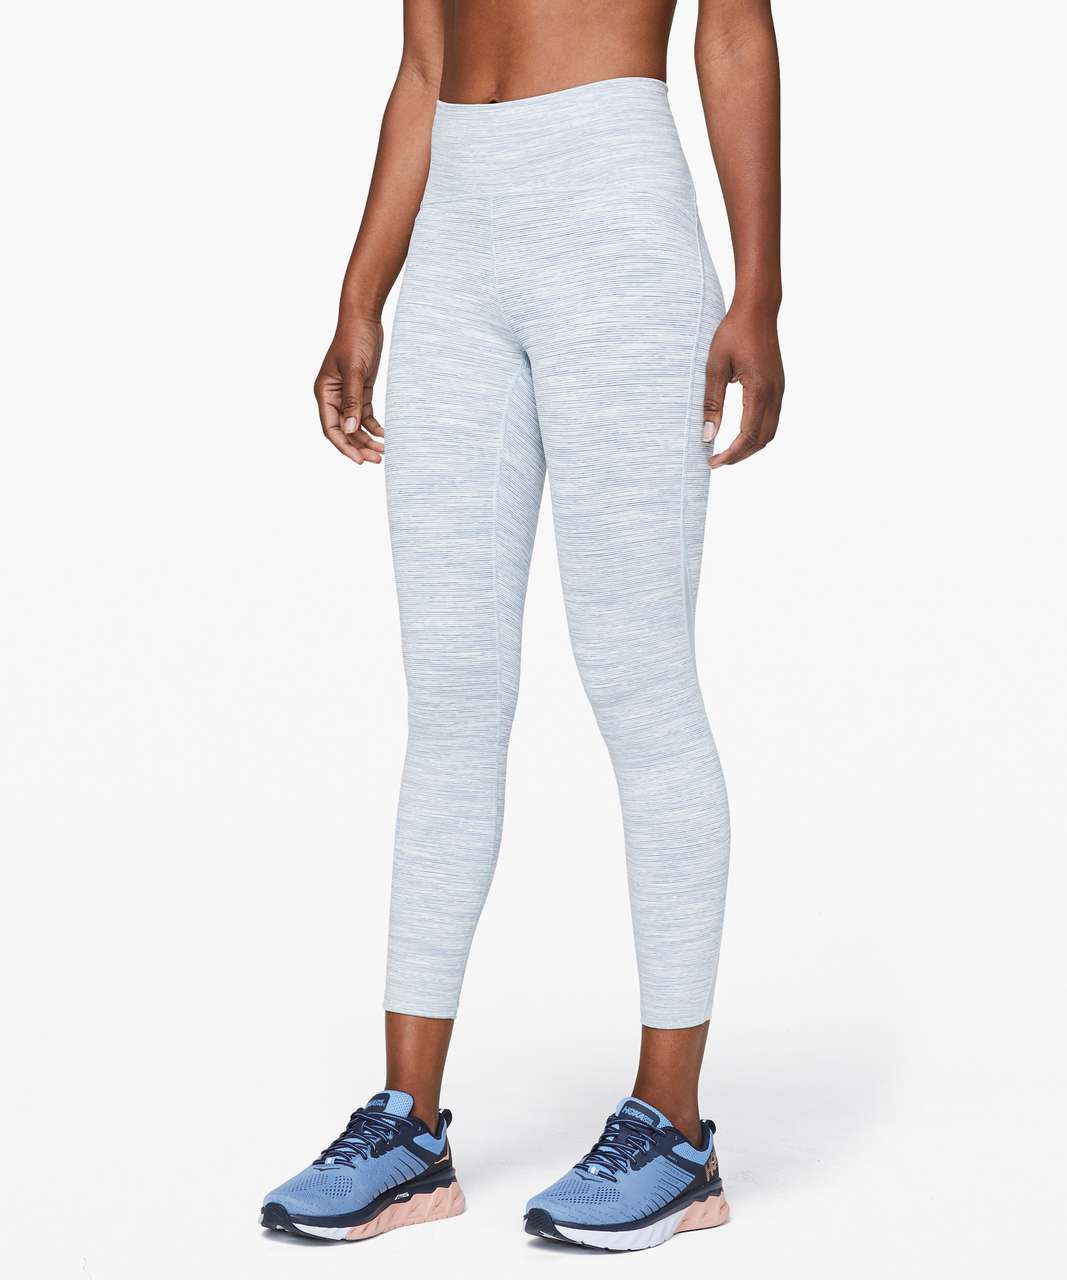 Lululemon Train Times Pant 25" - Wee Are From Space Sheer Blue Chambray